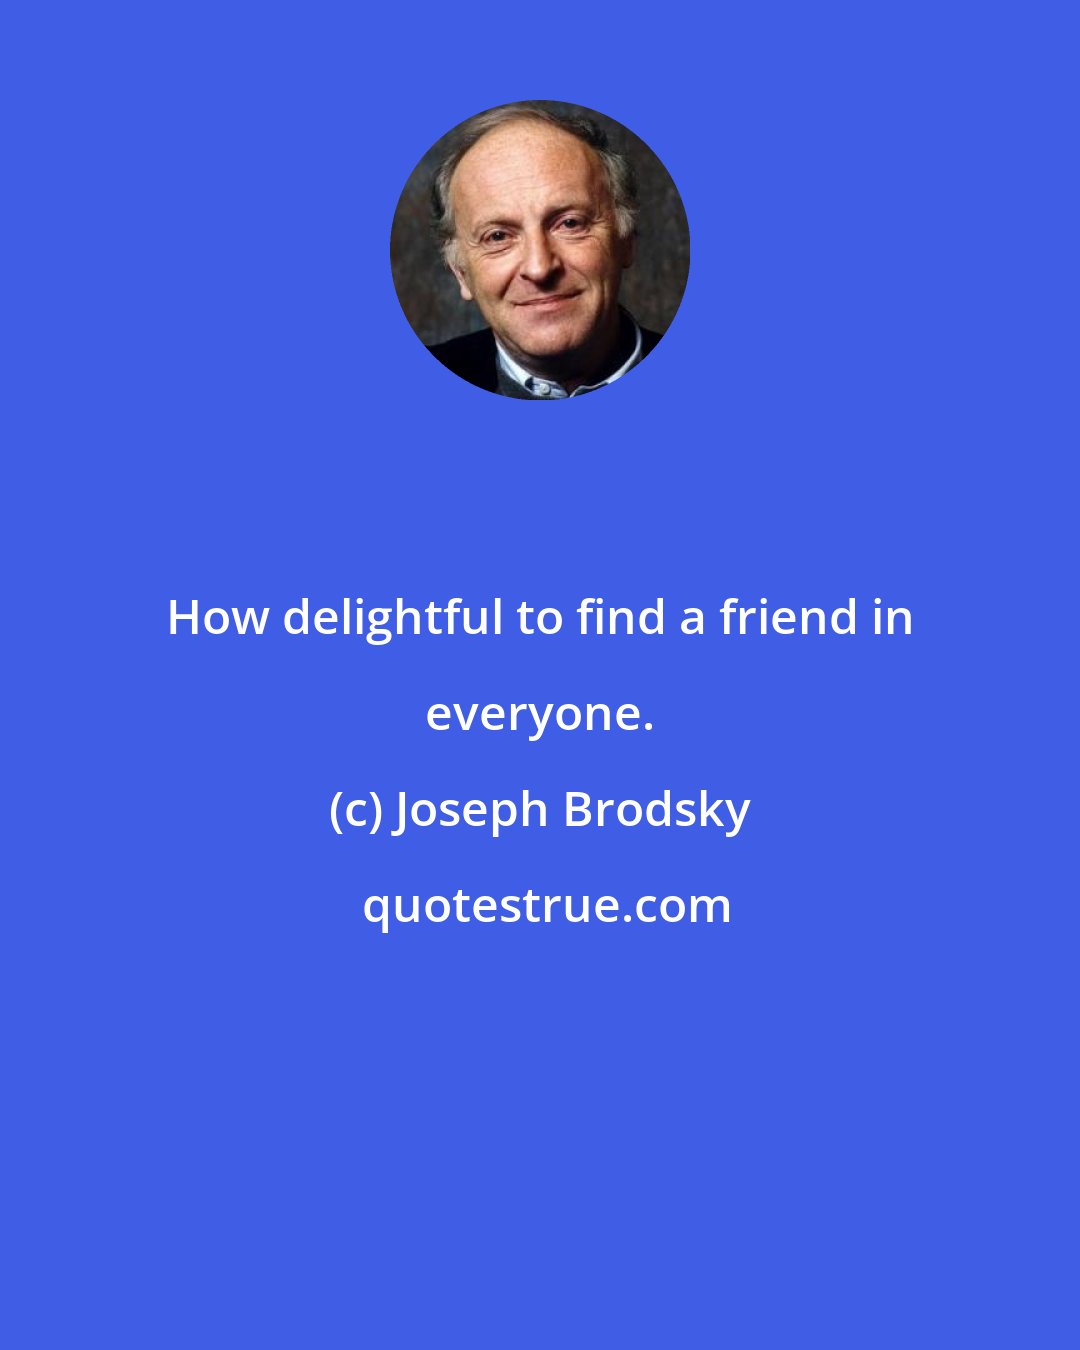 Joseph Brodsky: How delightful to find a friend in everyone.